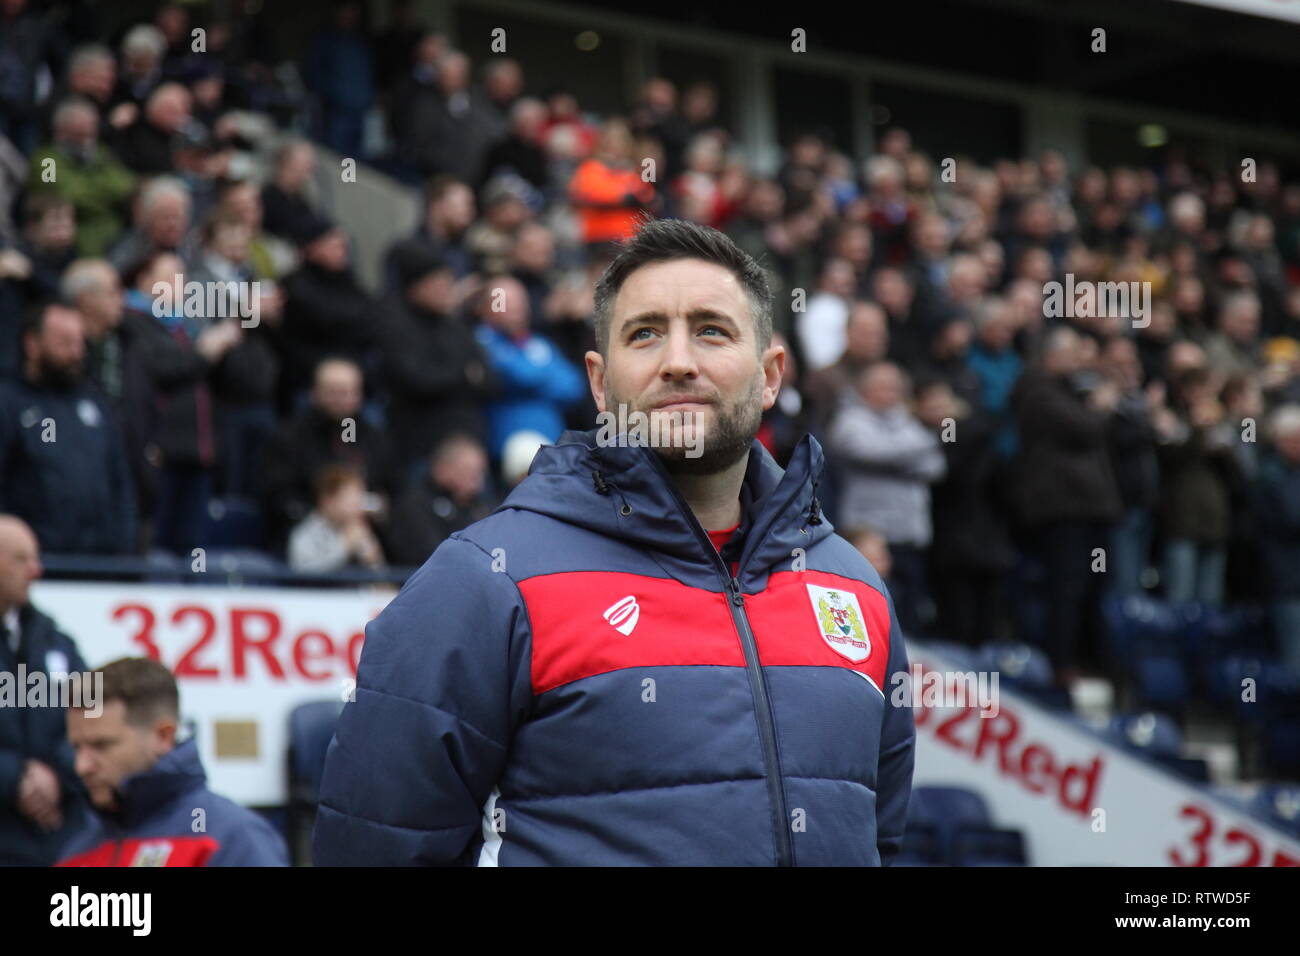 Preston, Lancashire, UK. Bristol City manager Lee Johnson in the dugout ahead of the Championship game between Preston North End and Bristol City at Deepdale which ended in a 1-1 draw. Stock Photo